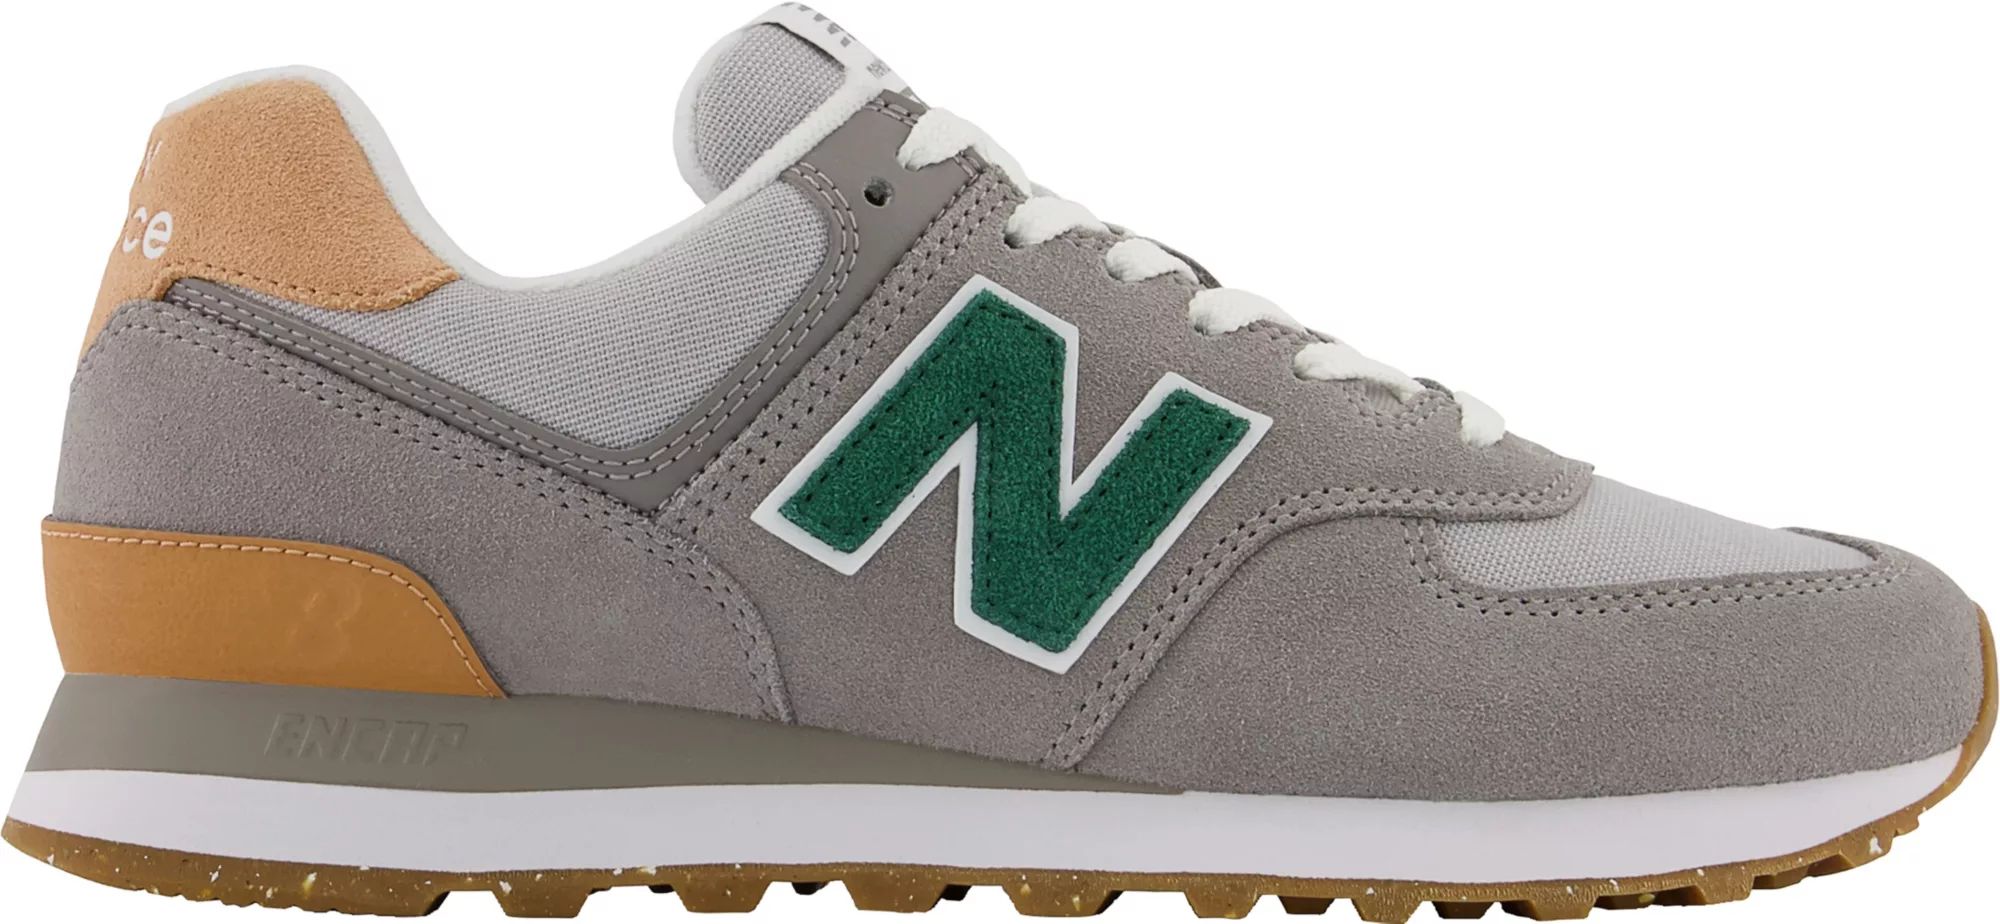 New Balance Women's 574 Shoes, Size 10, Grey/Green | Dick's Sporting Goods